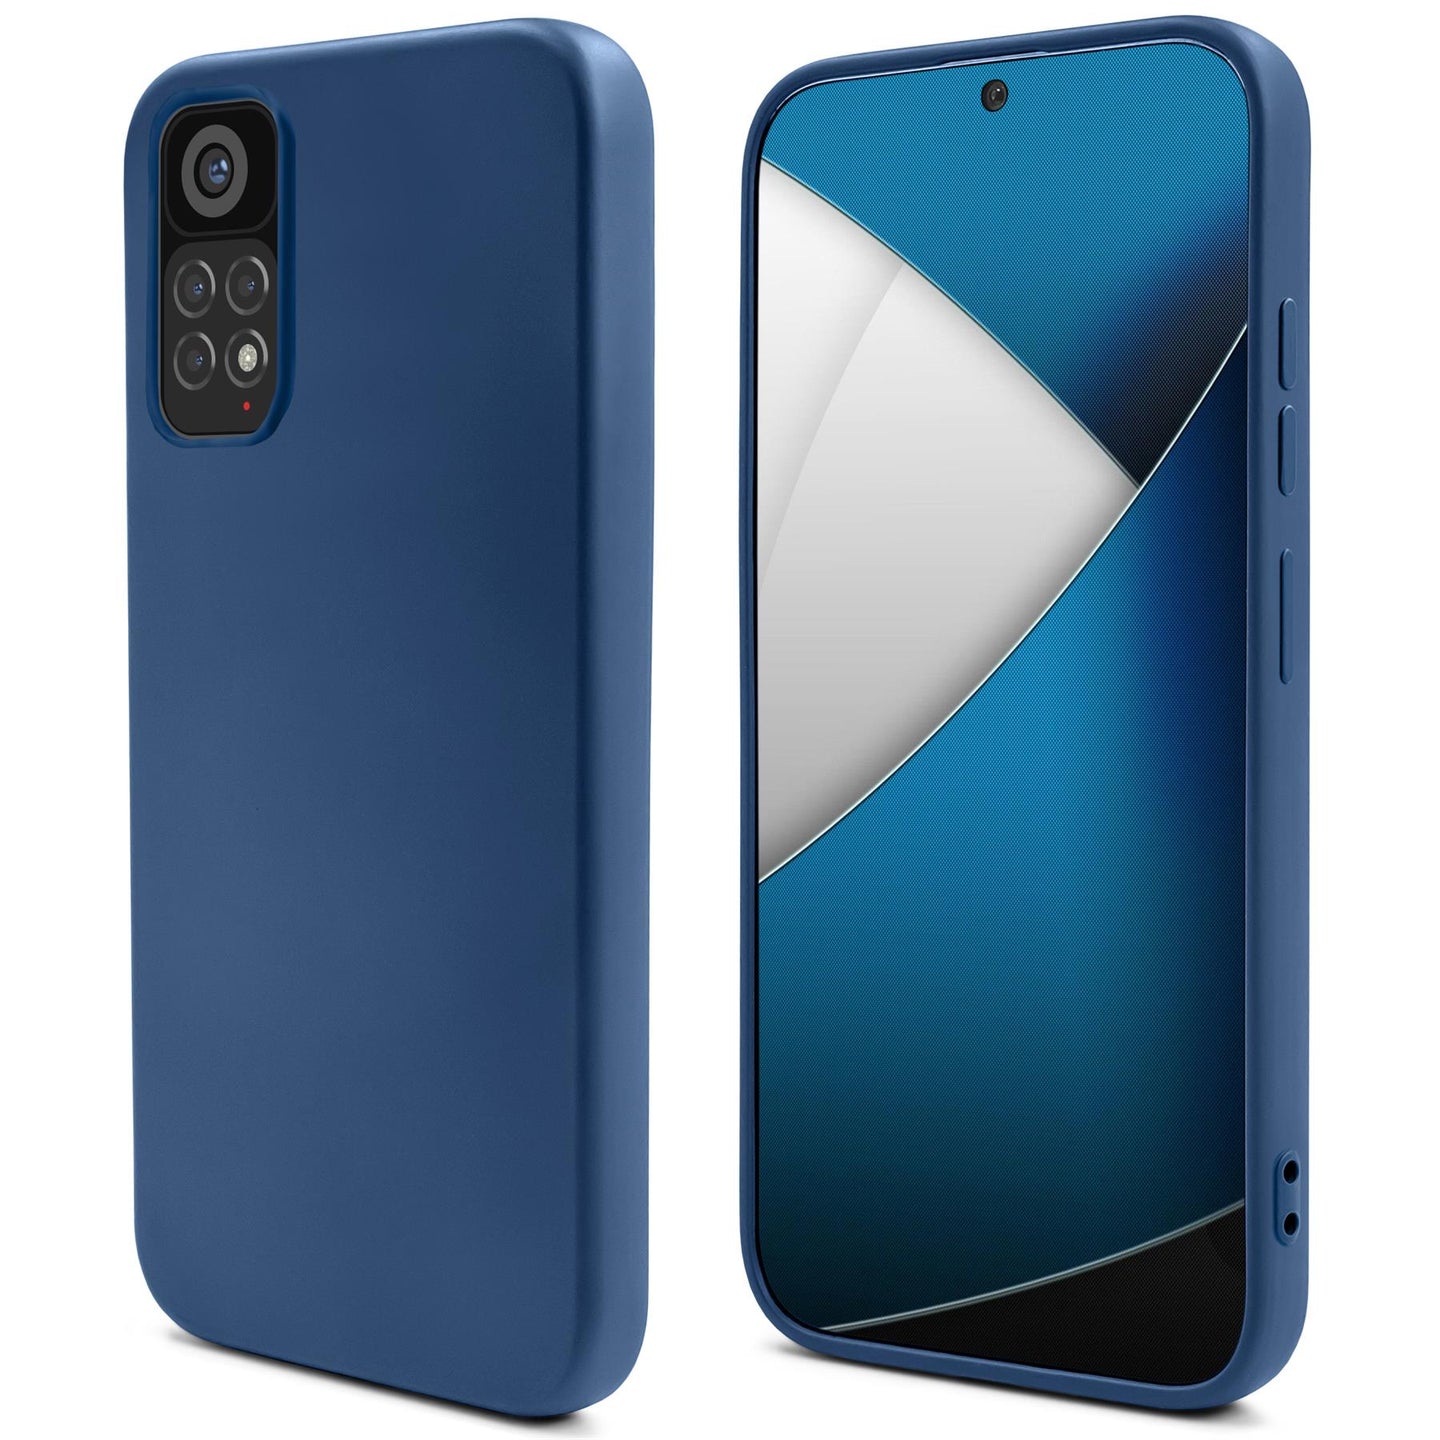 Moozy Lifestyle. Silicone Case for Xiaomi Redmi Note 11 Pro 5G and 4G, Midnight Blue - Liquid Silicone Lightweight Cover with Matte Finish and Soft Microfiber Lining, Premium Silicone Case